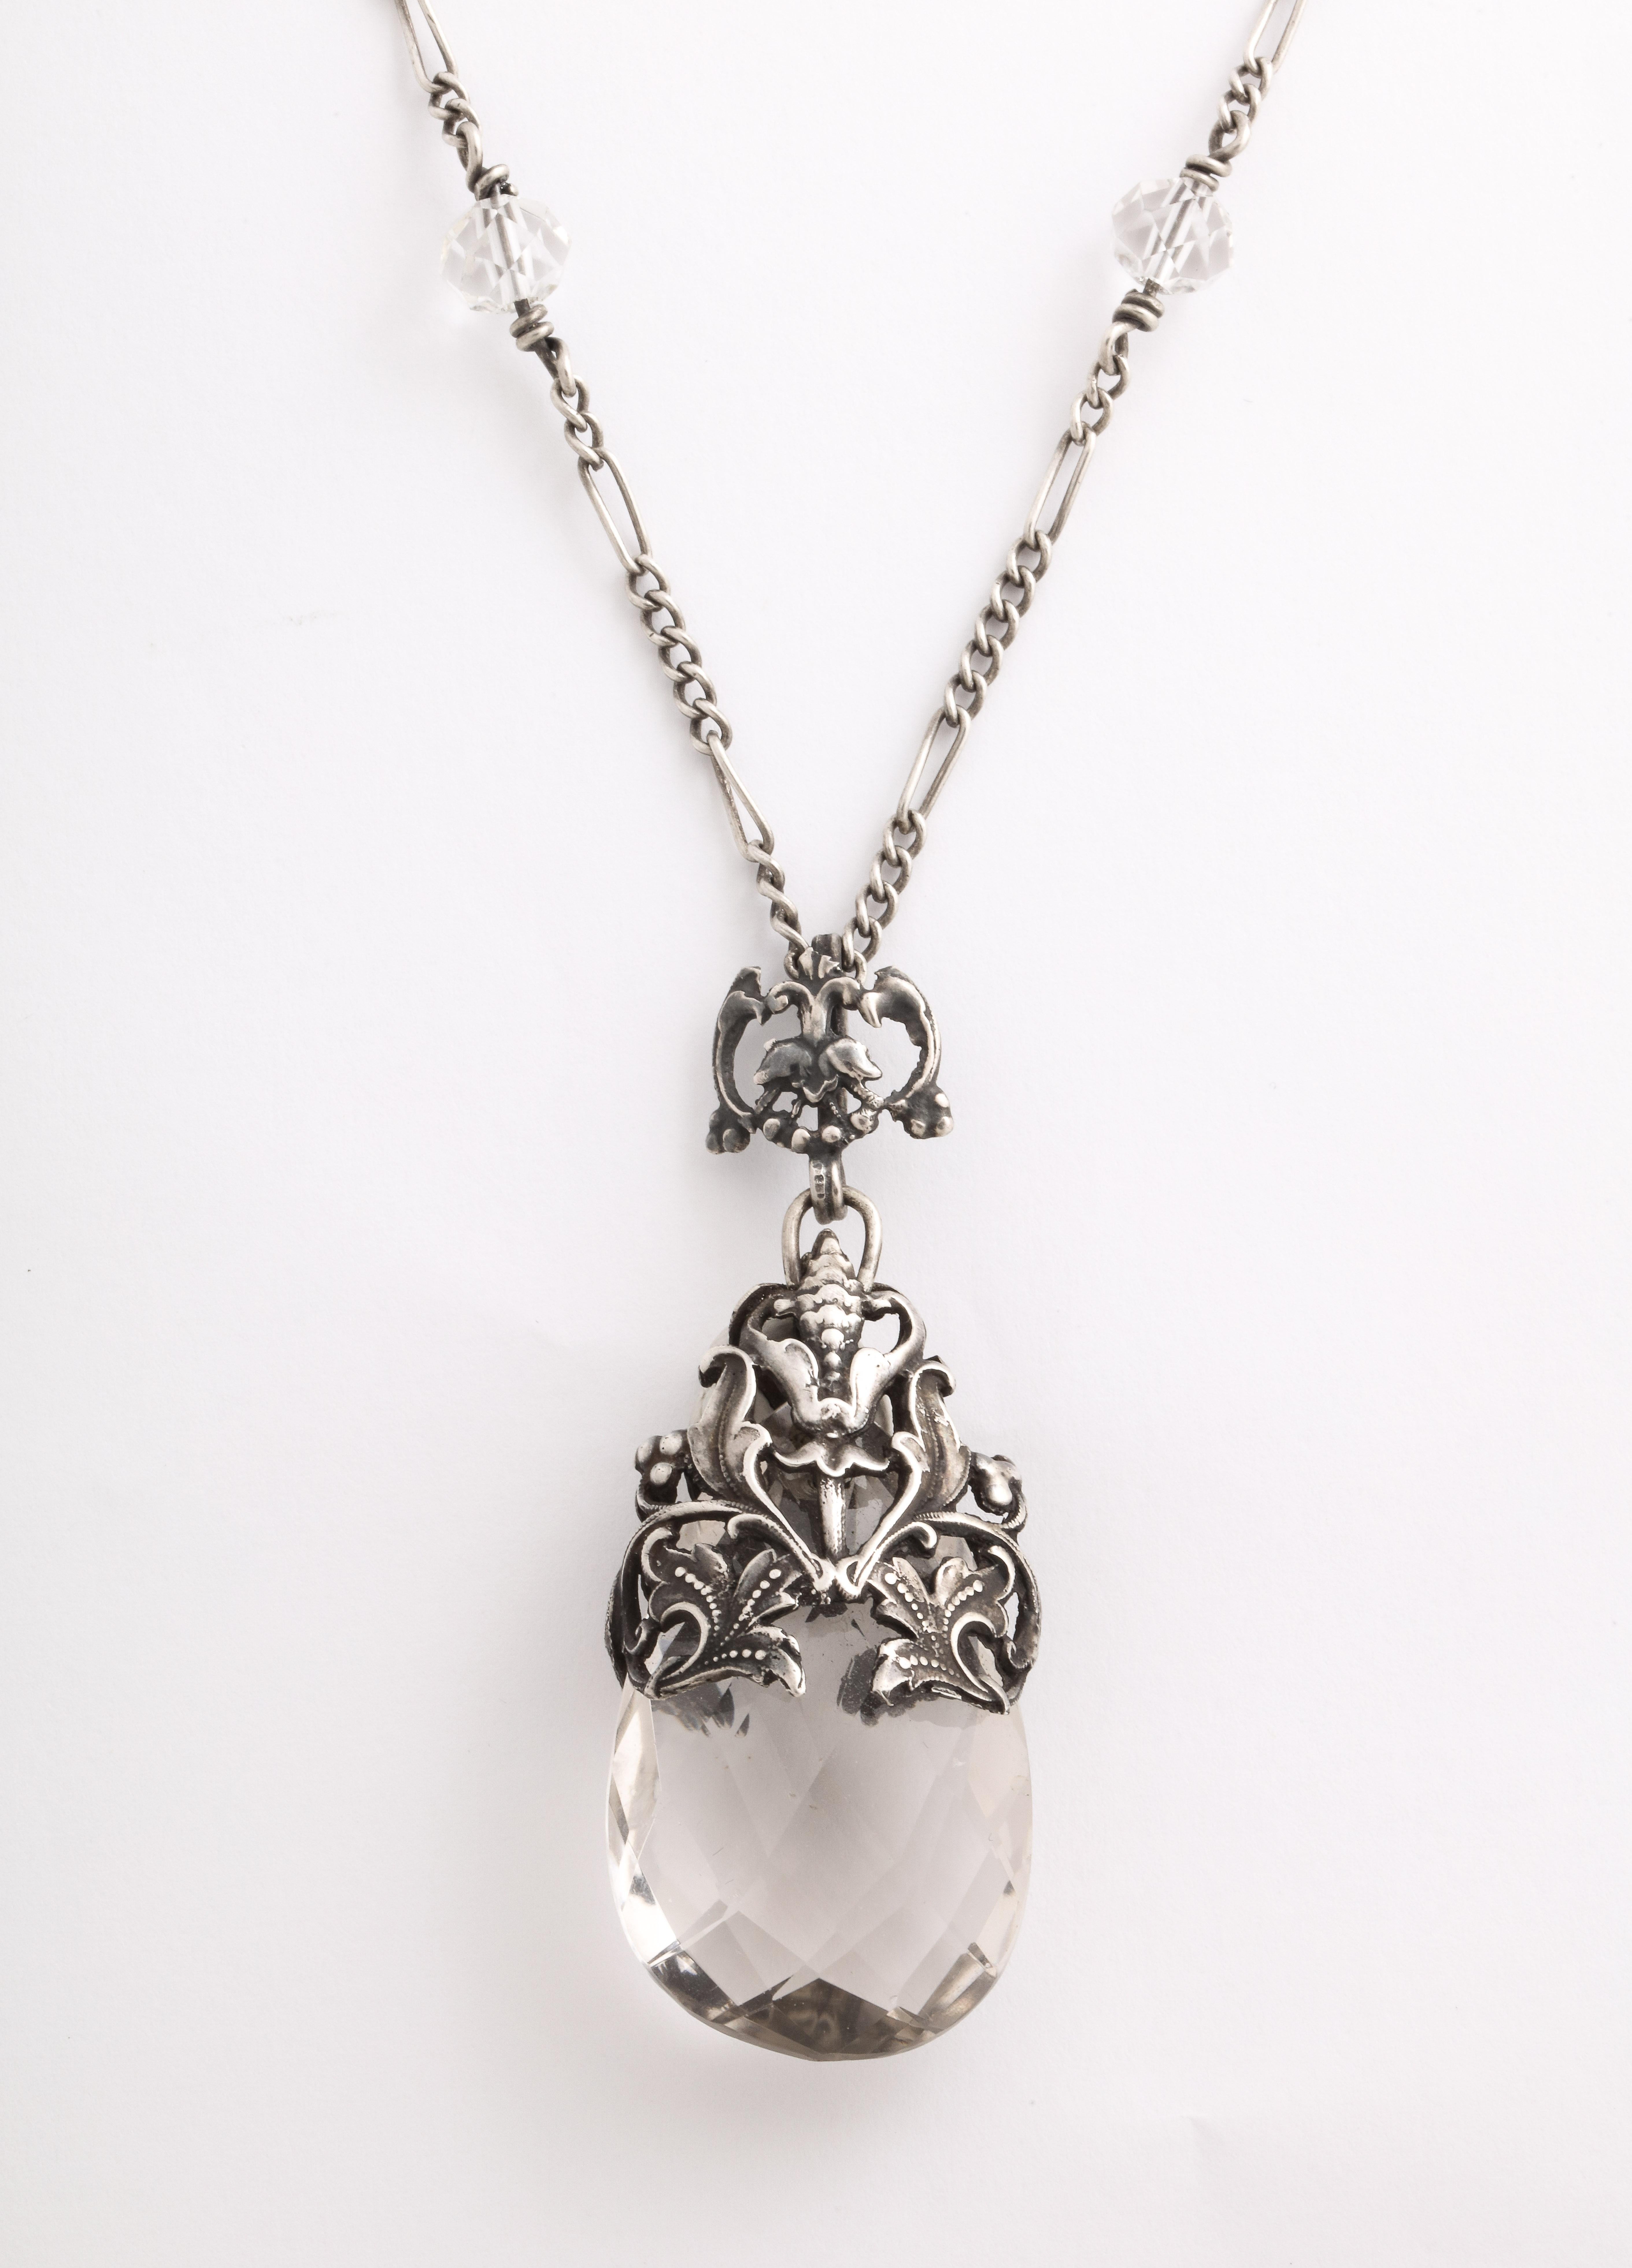 From the Art Nouveau Period a beautifully designed Rock Crystal Necklace, the crystal gracefully wrapped in sterling engraved leaves and buds. The rock crystal is diagonally faceted. The chain is original and arrives with the pendant. Around the